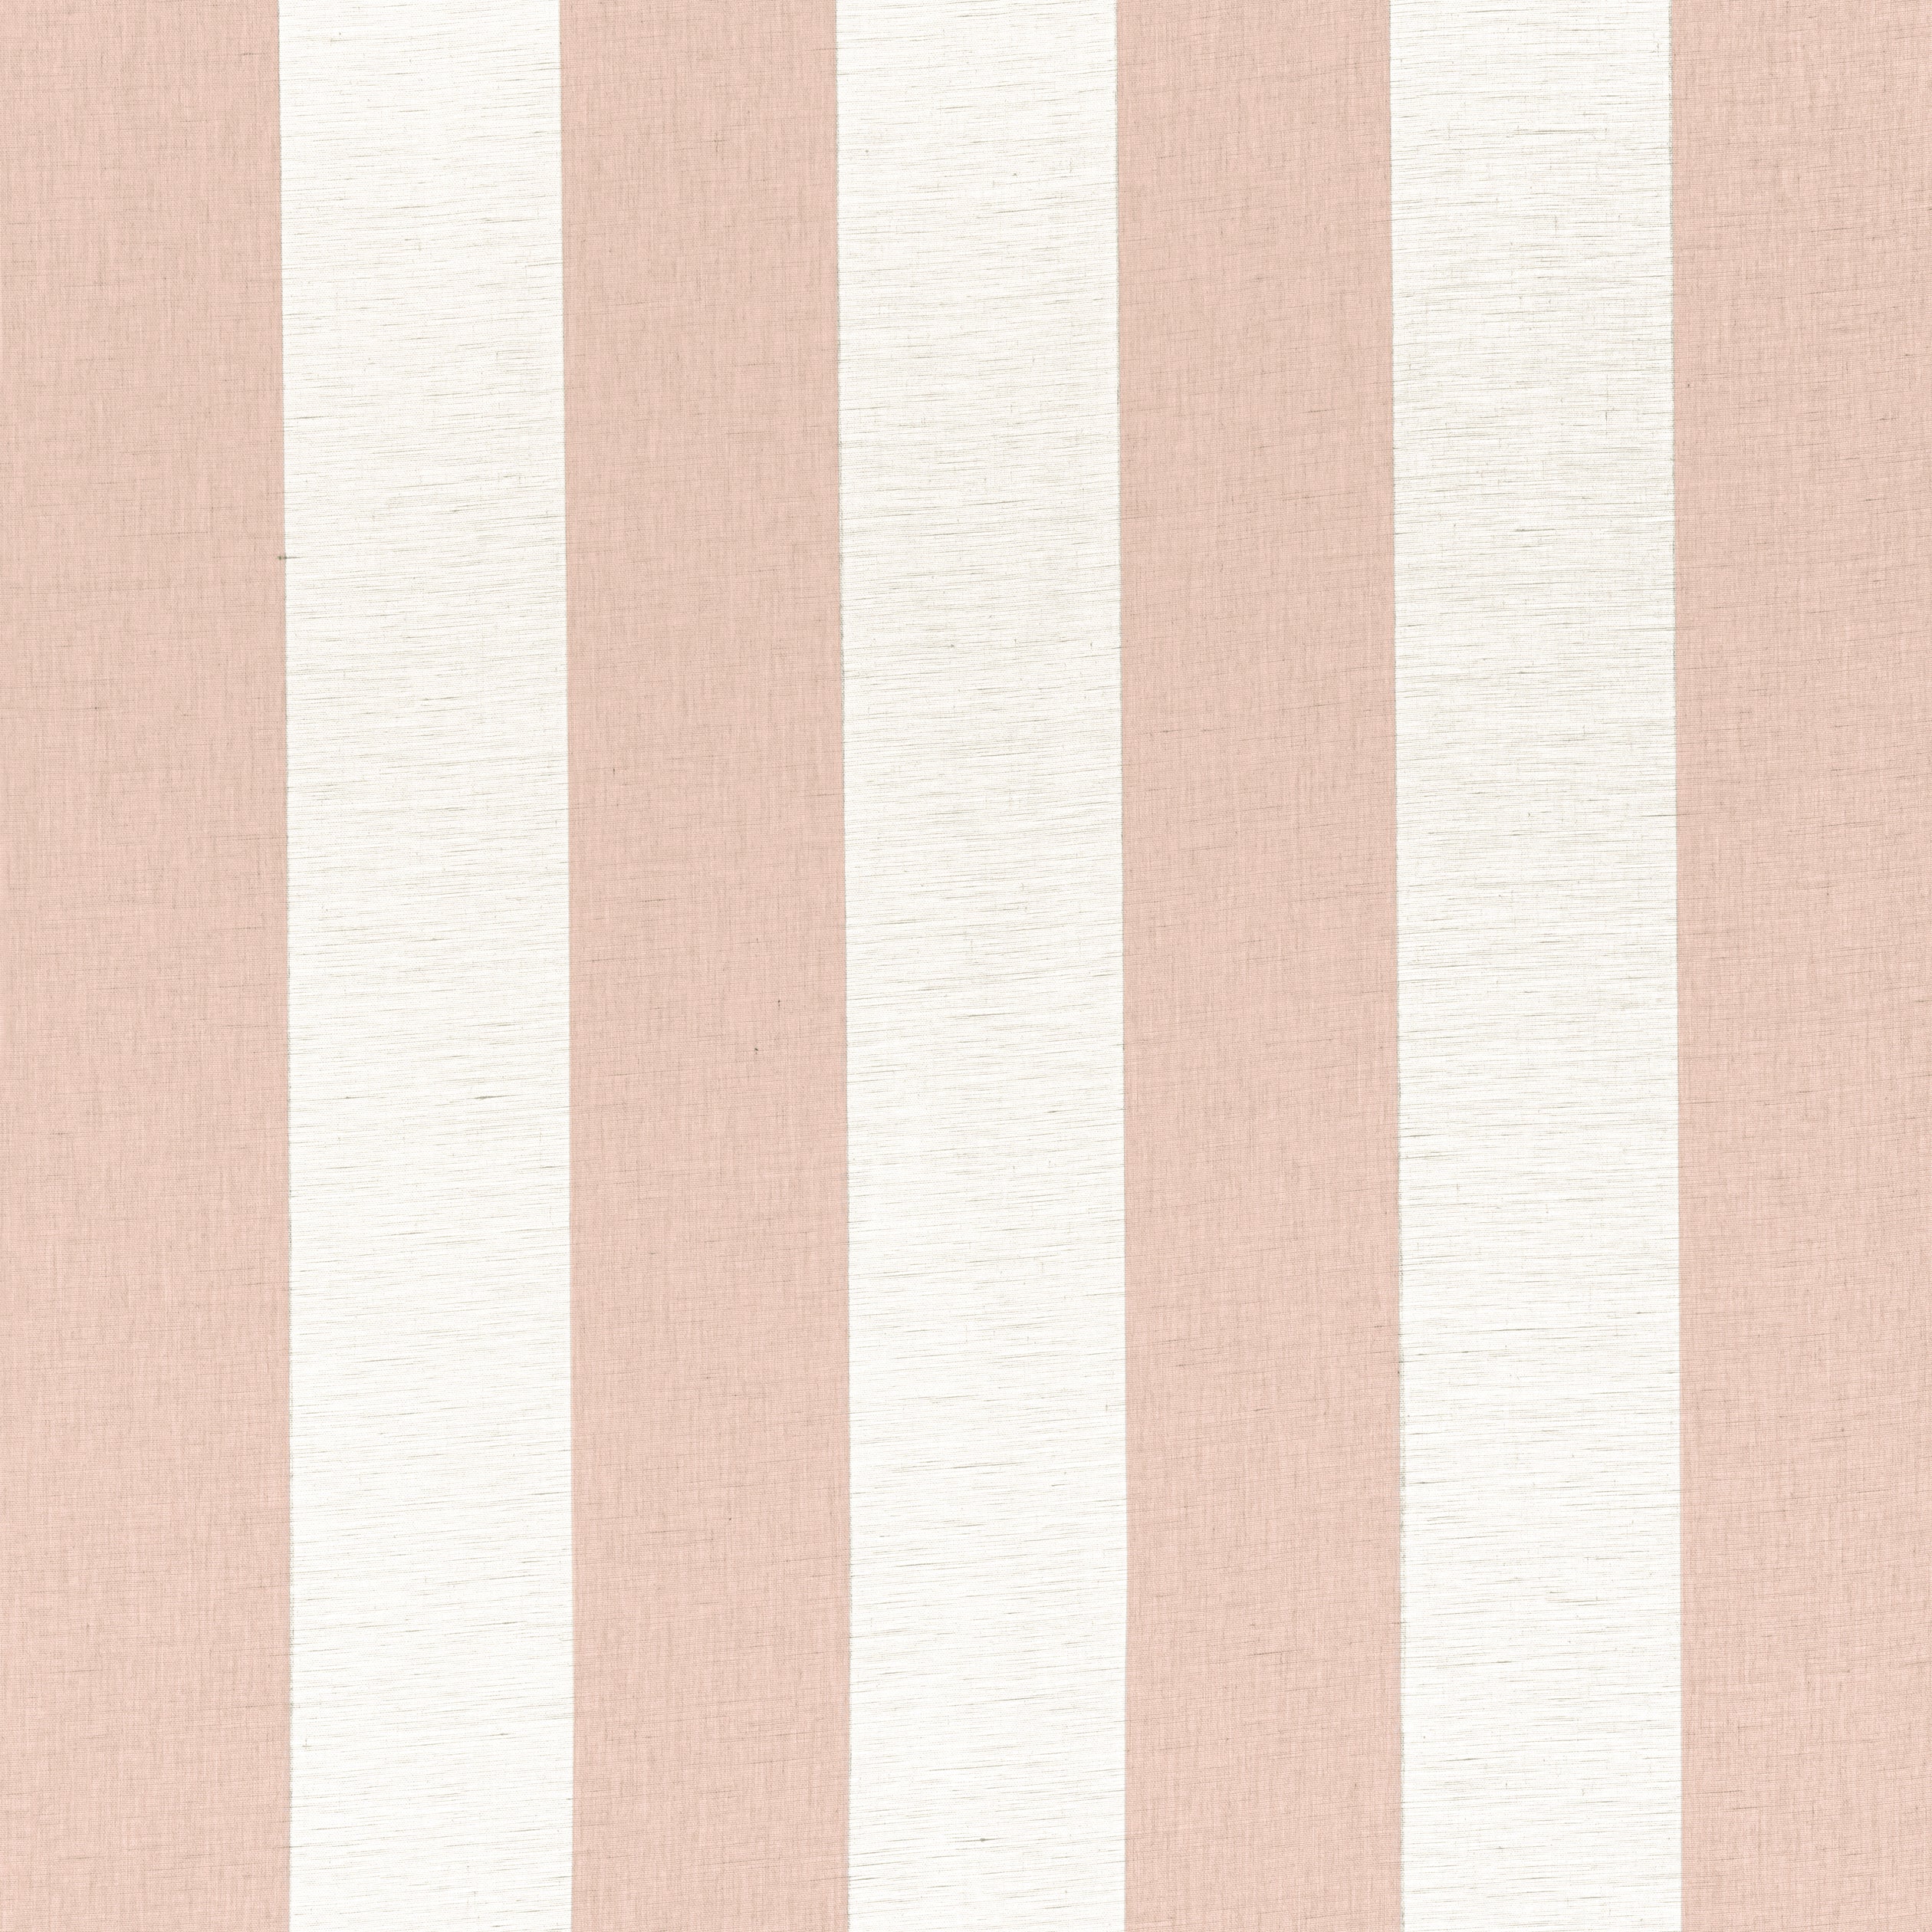 Newport Stripe fabric in clay and flax color - pattern number FWW8213 - by Thibaut in the Aura collection